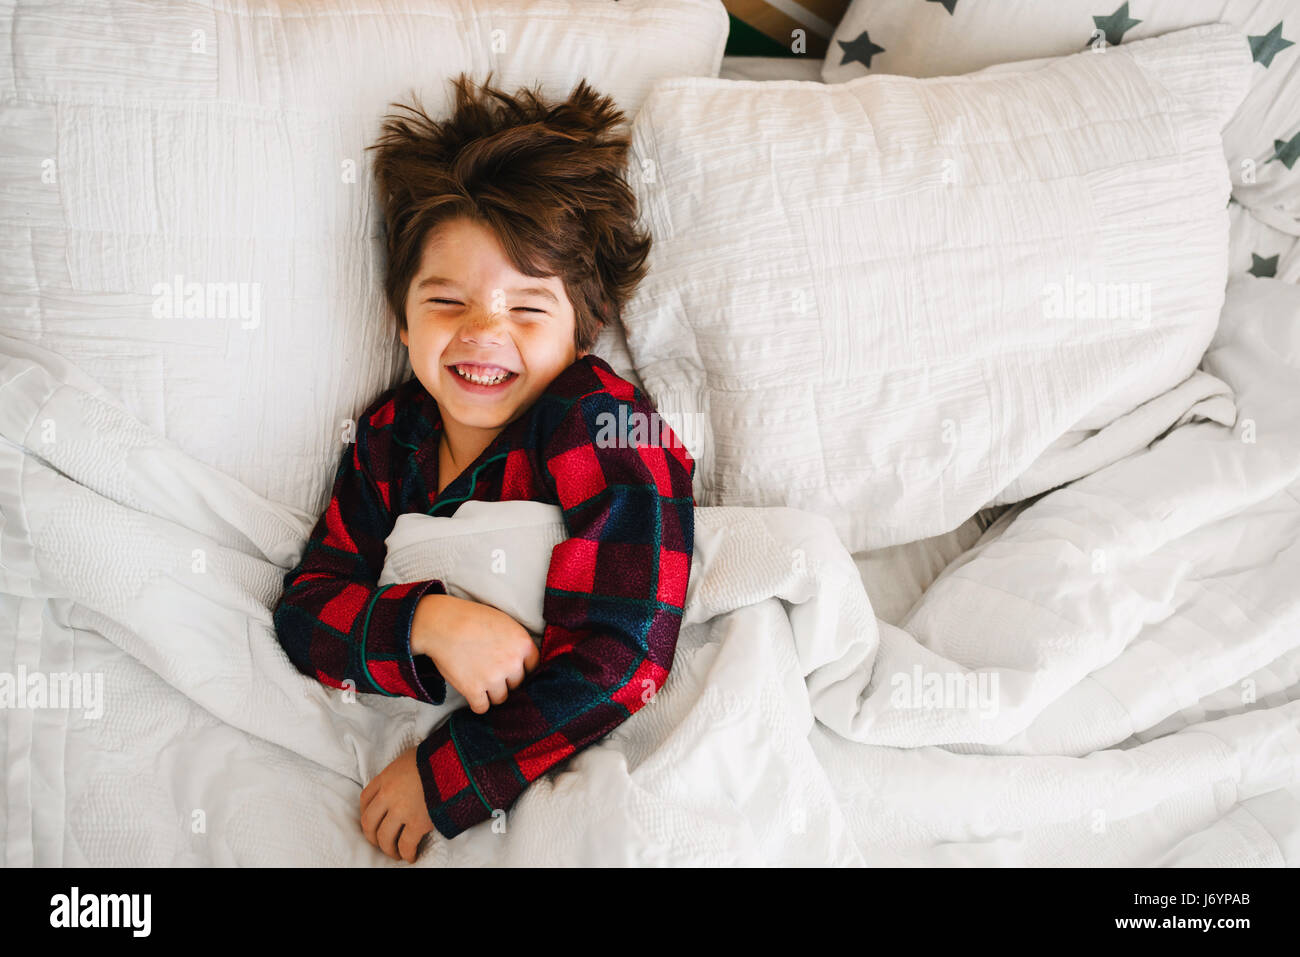 Portrait of a boy lying in bed laughing Stock Photo